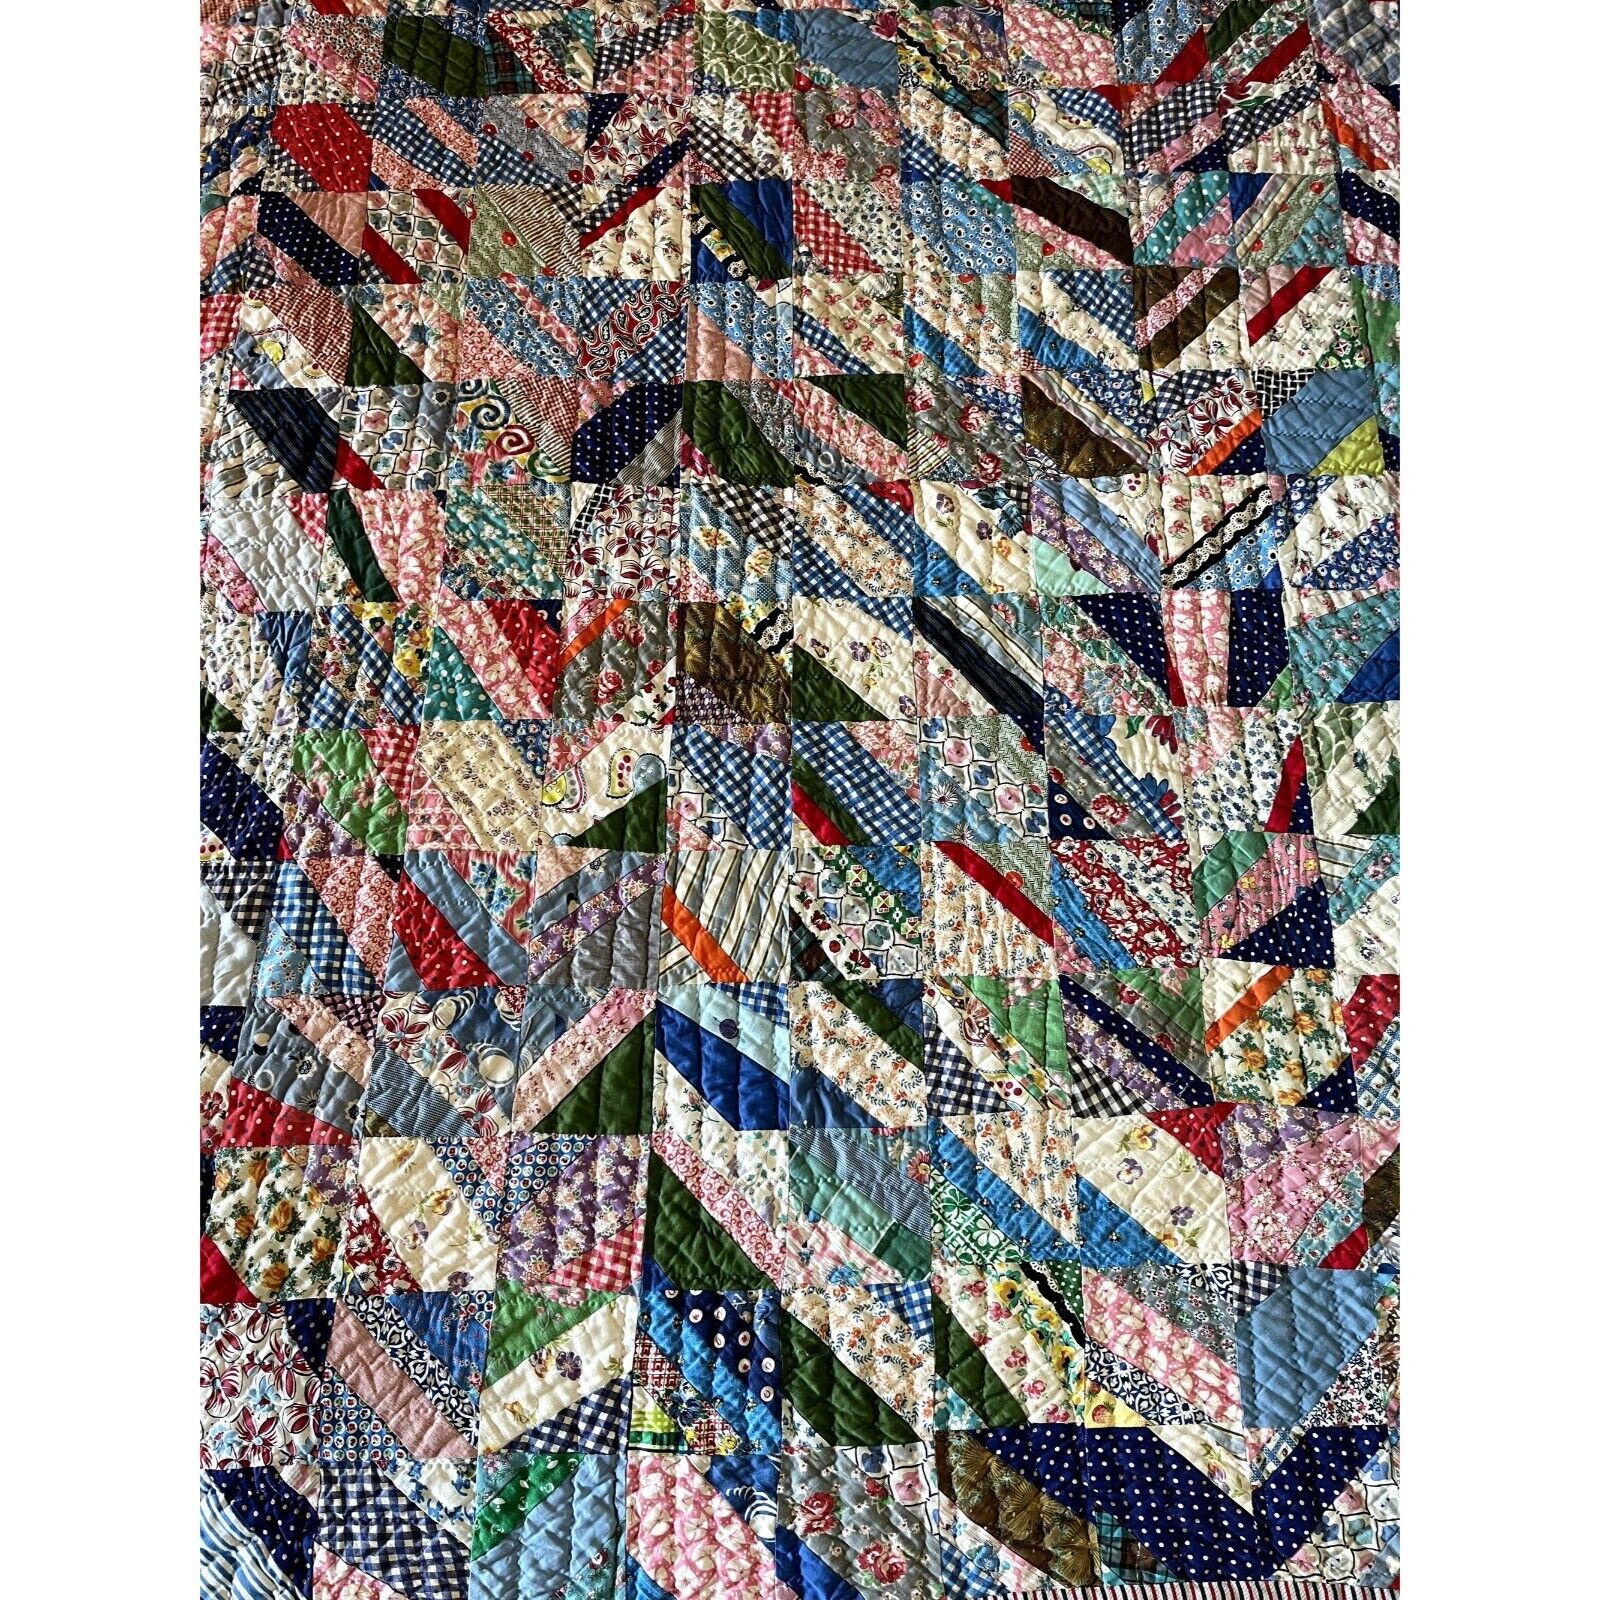 Antique Vintage 1930s Strip Scrappy Hand Quilted Quilt Colorful & Fun Handmade